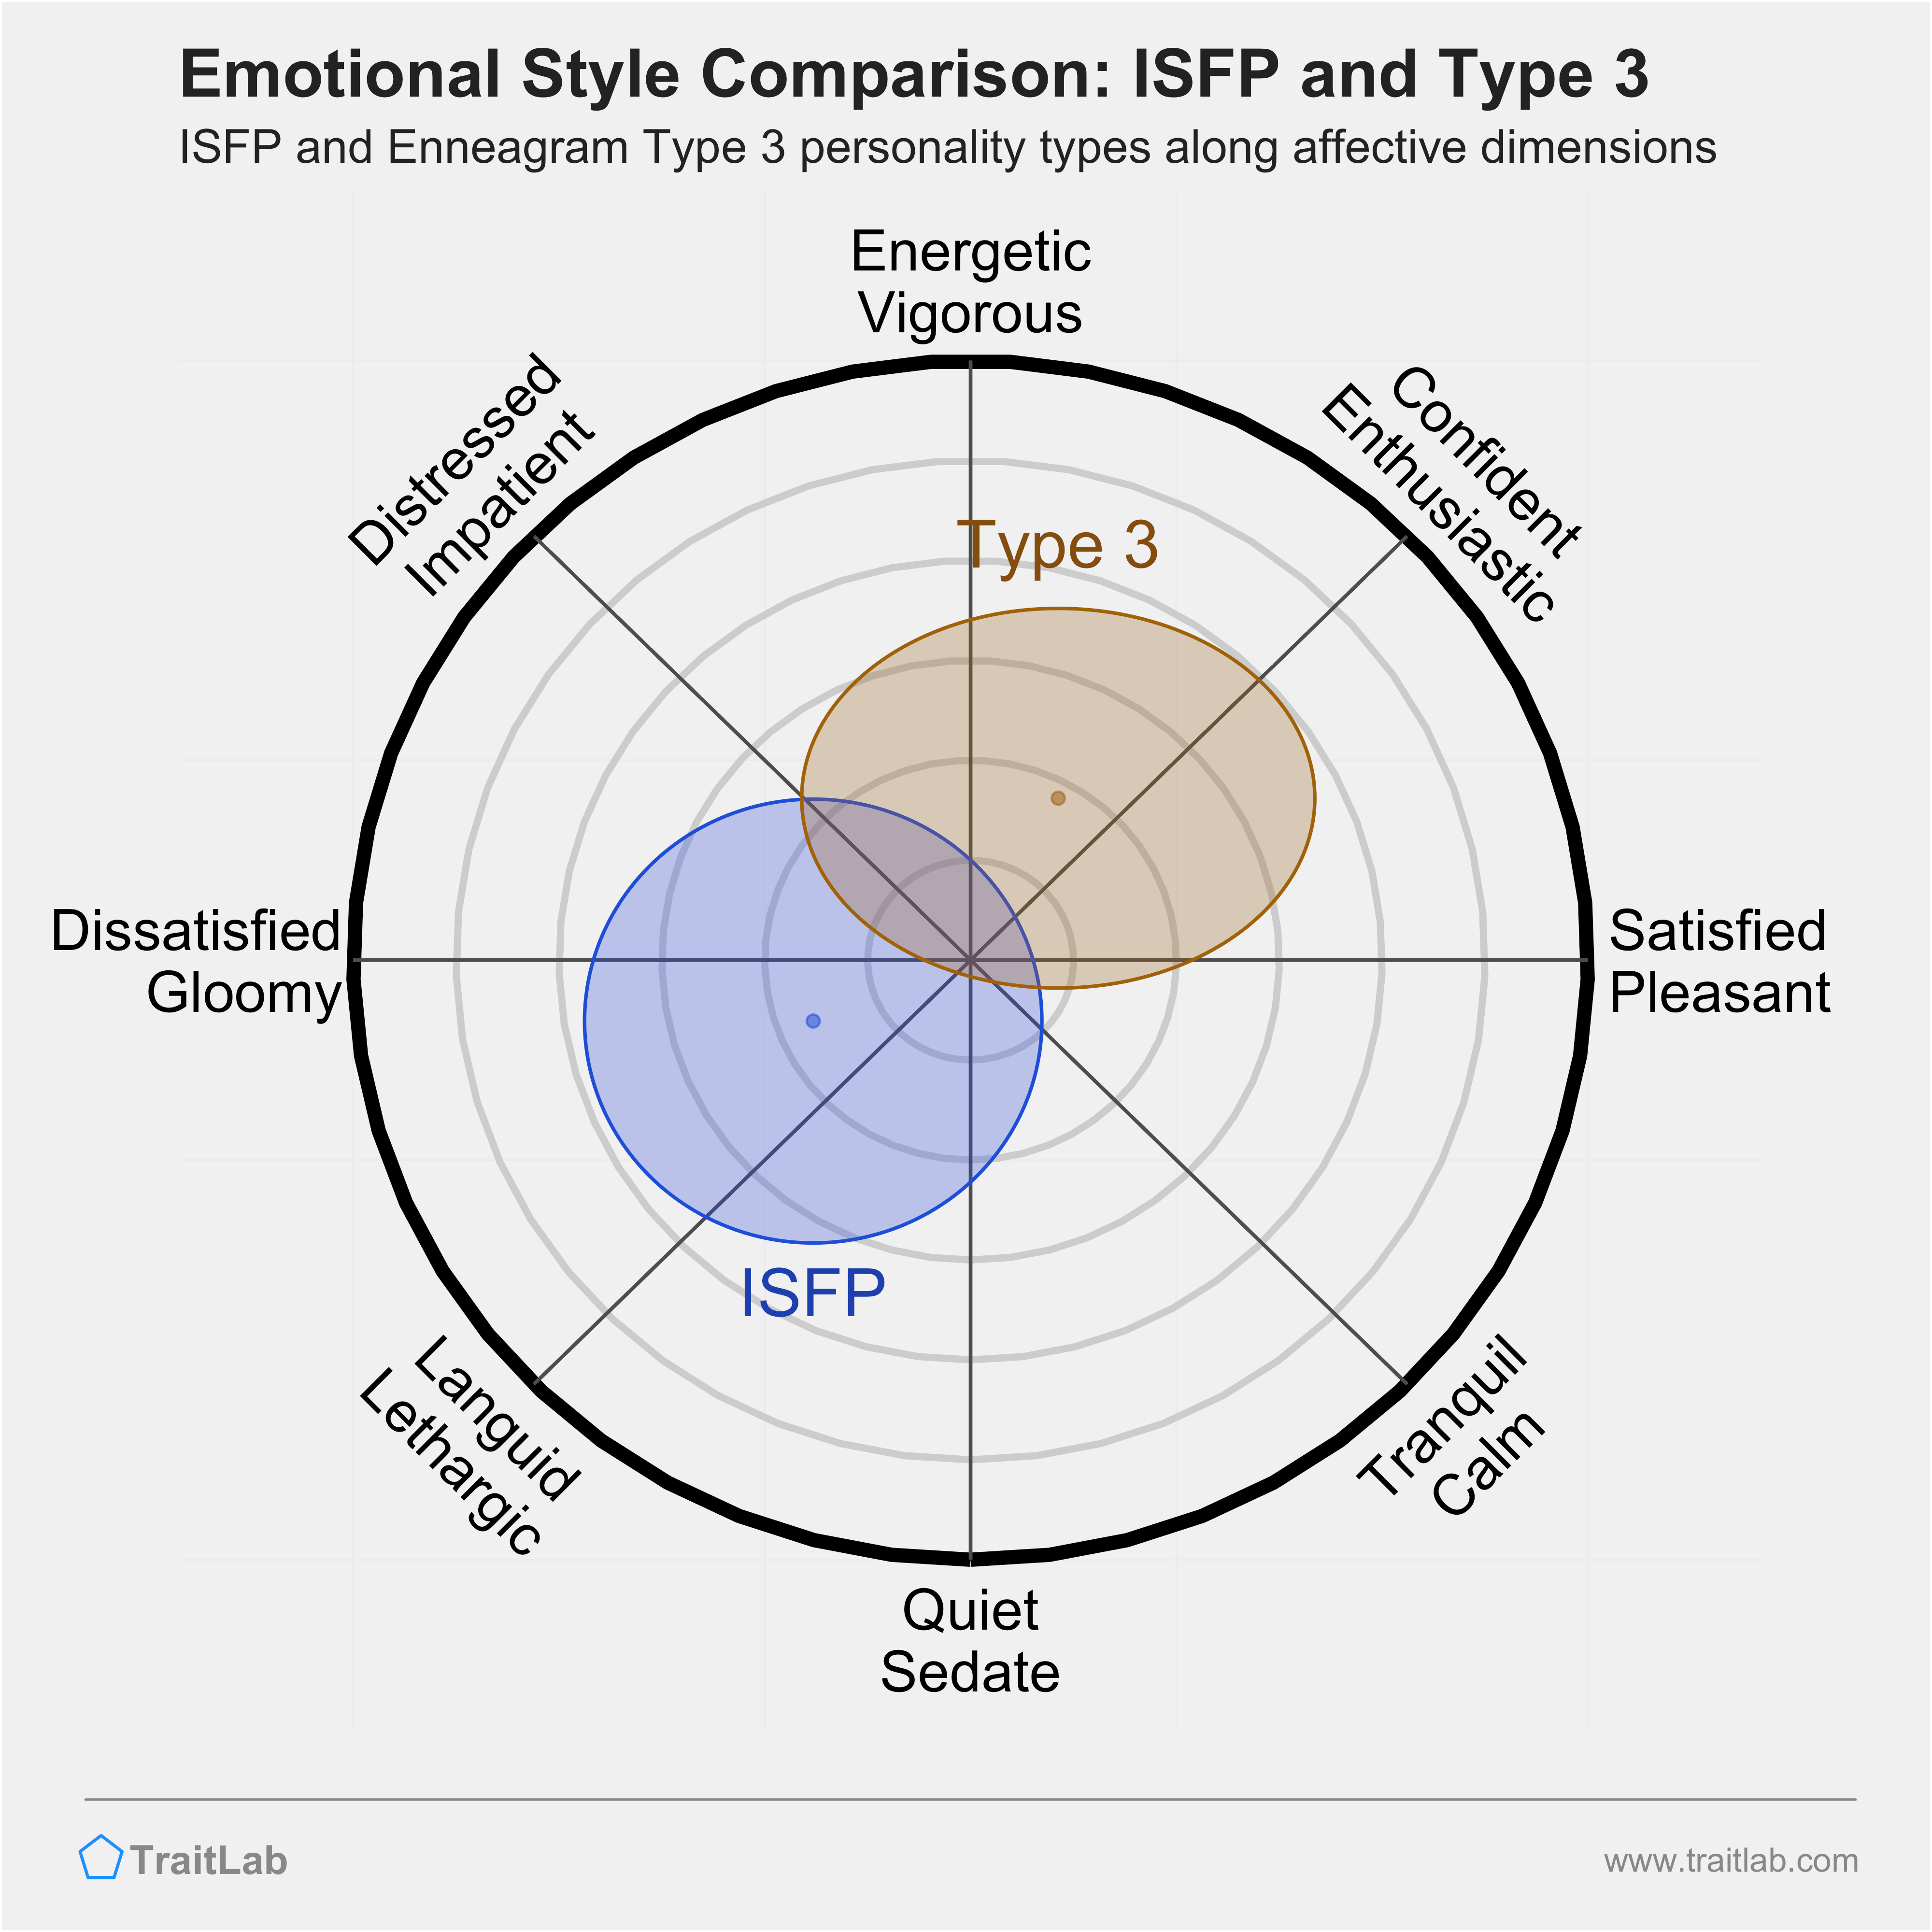 ISFP and Type 3 comparison across emotional (affective) dimensions